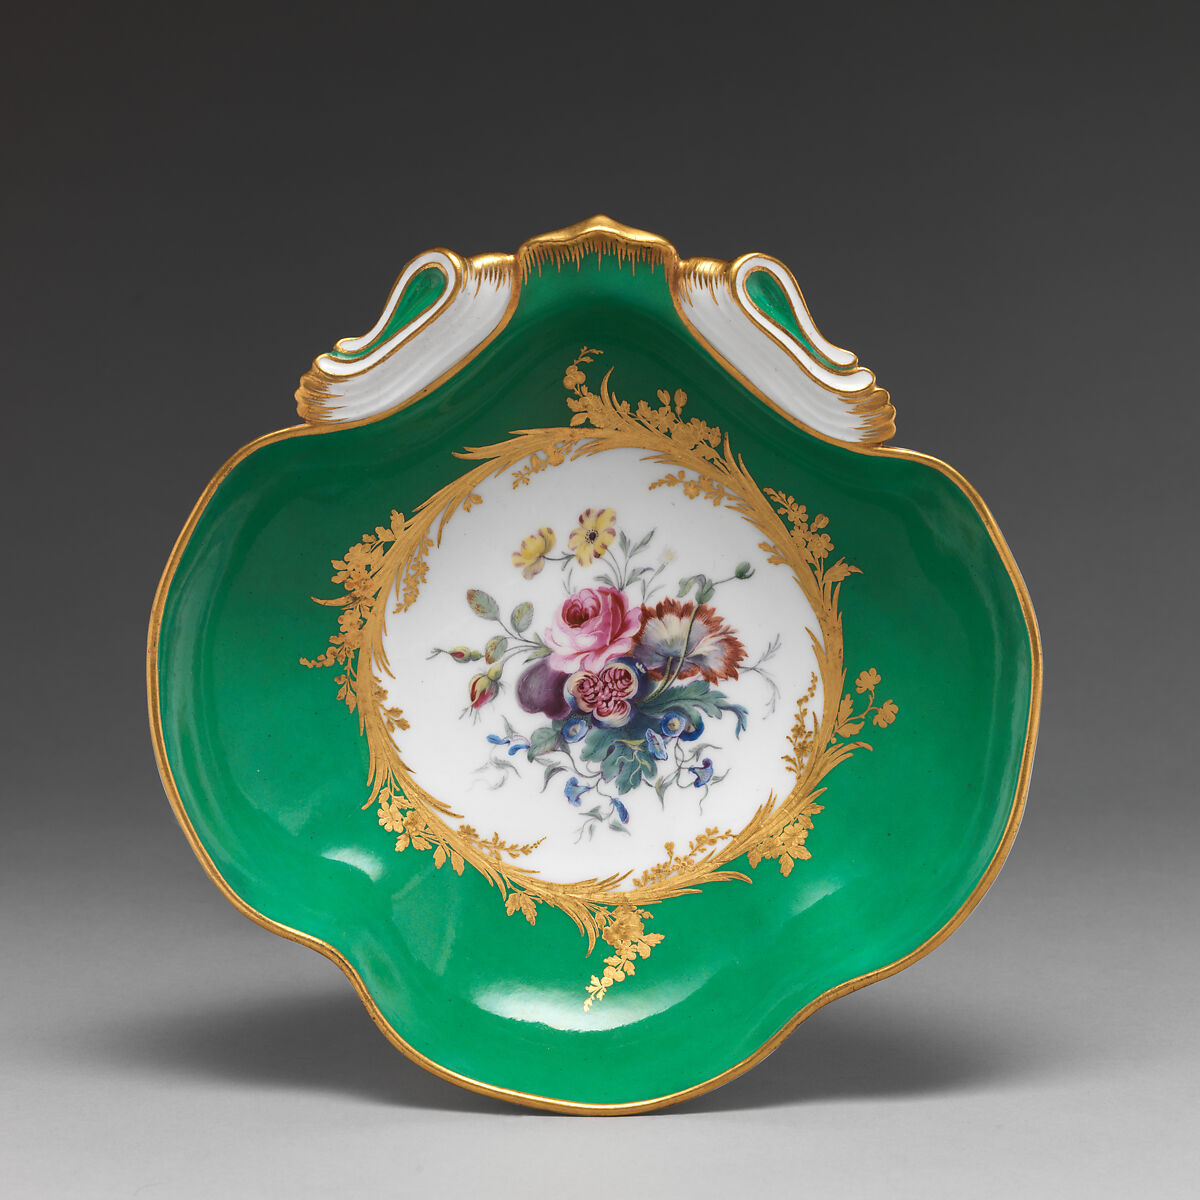 Fruit dish (compotier coquille) (one of four) (part of a service), Sèvres Manufactory (French, 1740–present), Soft-paste porcelain, French, Sèvres 